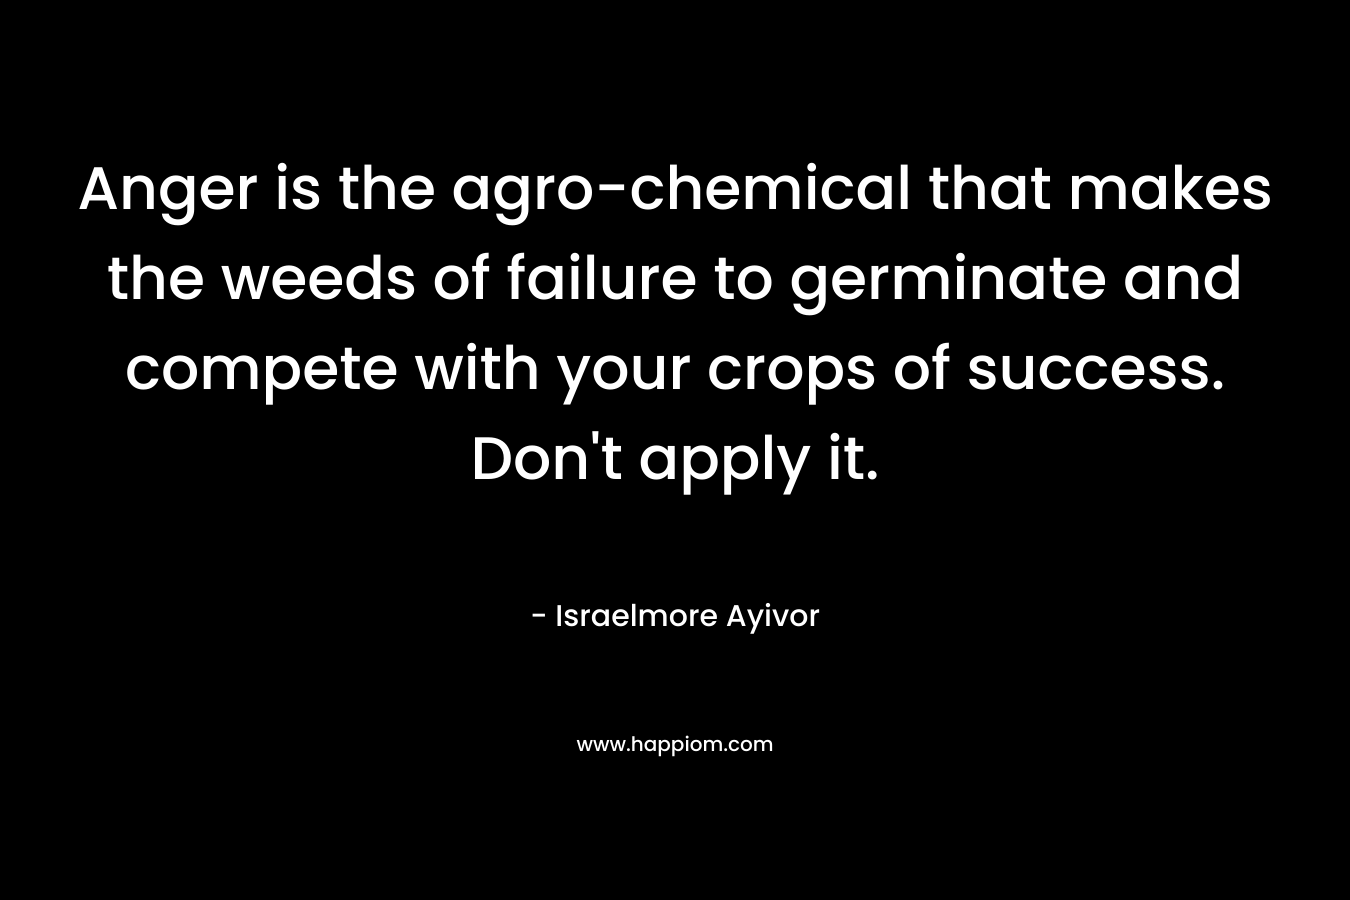 Anger is the agro-chemical that makes the weeds of failure to germinate and compete with your crops of success. Don’t apply it. – Israelmore Ayivor